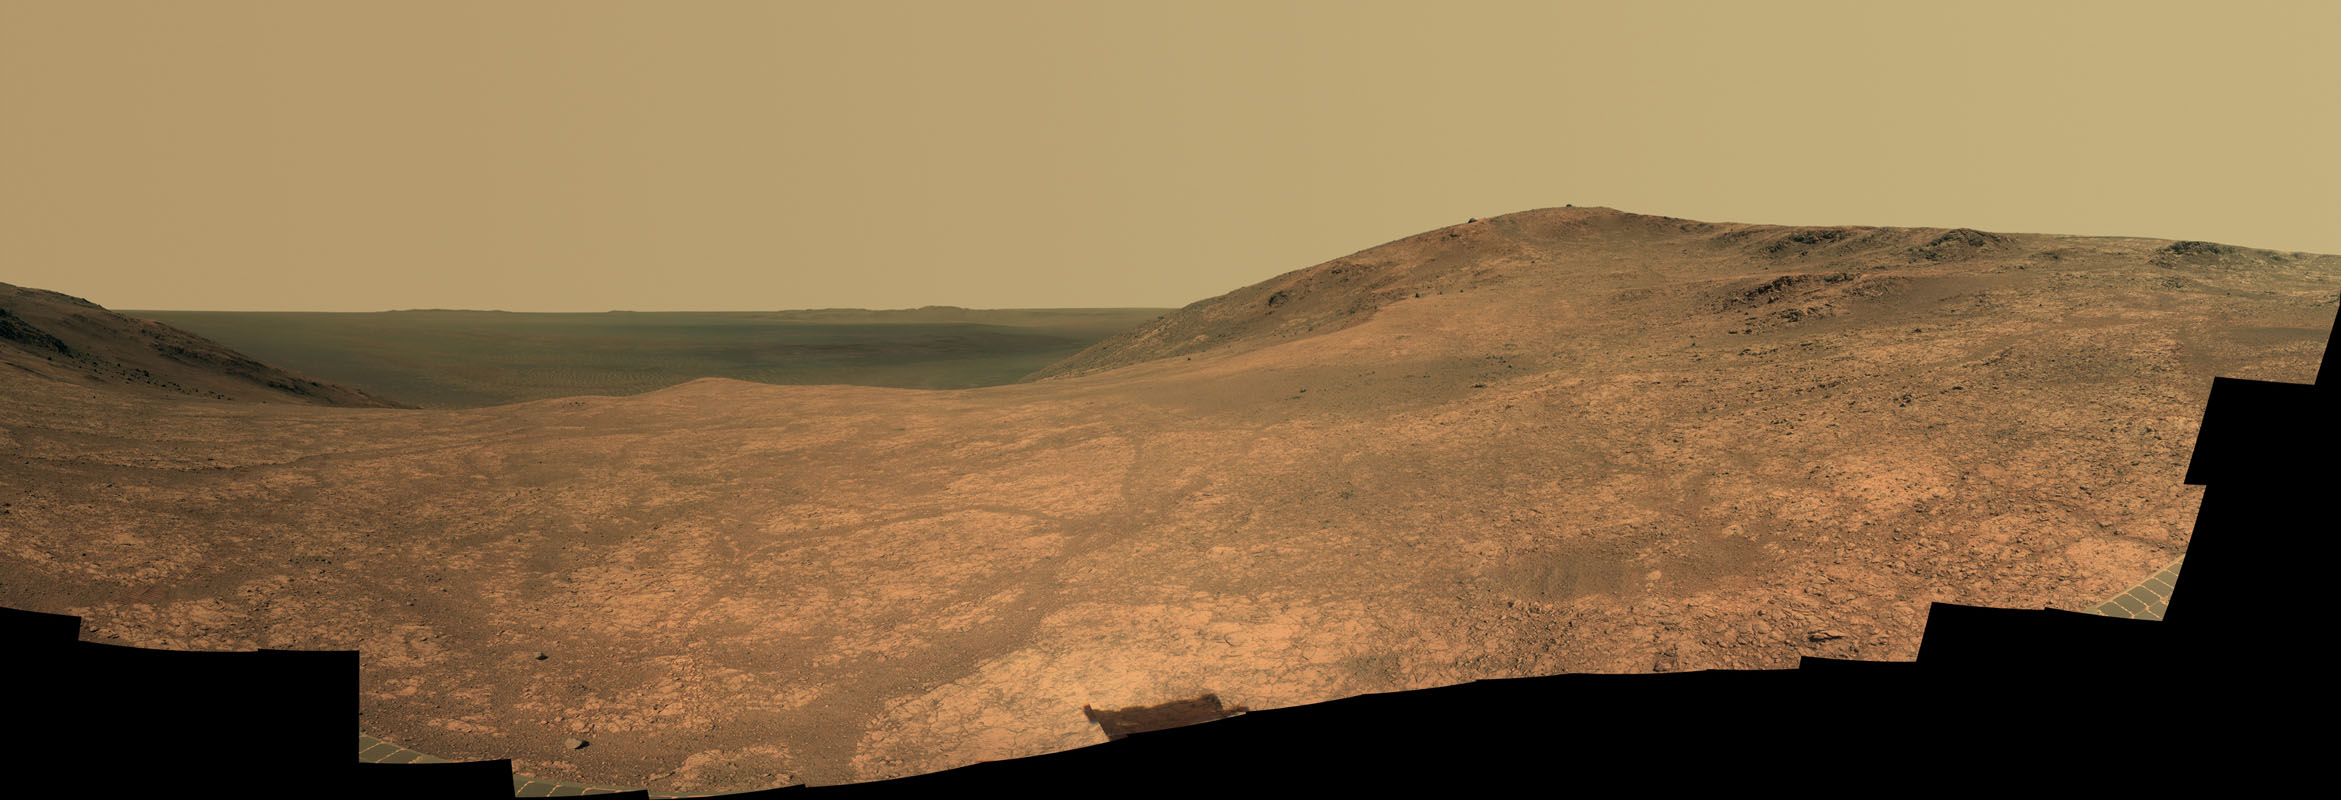 Panoramic view of Marathon Valley as seen by the Opportunity rover. The interior of Endeavour Crater lies in the distance. Soon, the rover will move southward to examine a gully thought to have been carved by water long ago. Photo Credit: NASA/JPL-Caltech/Cornell Univ./Arizona State Univ.